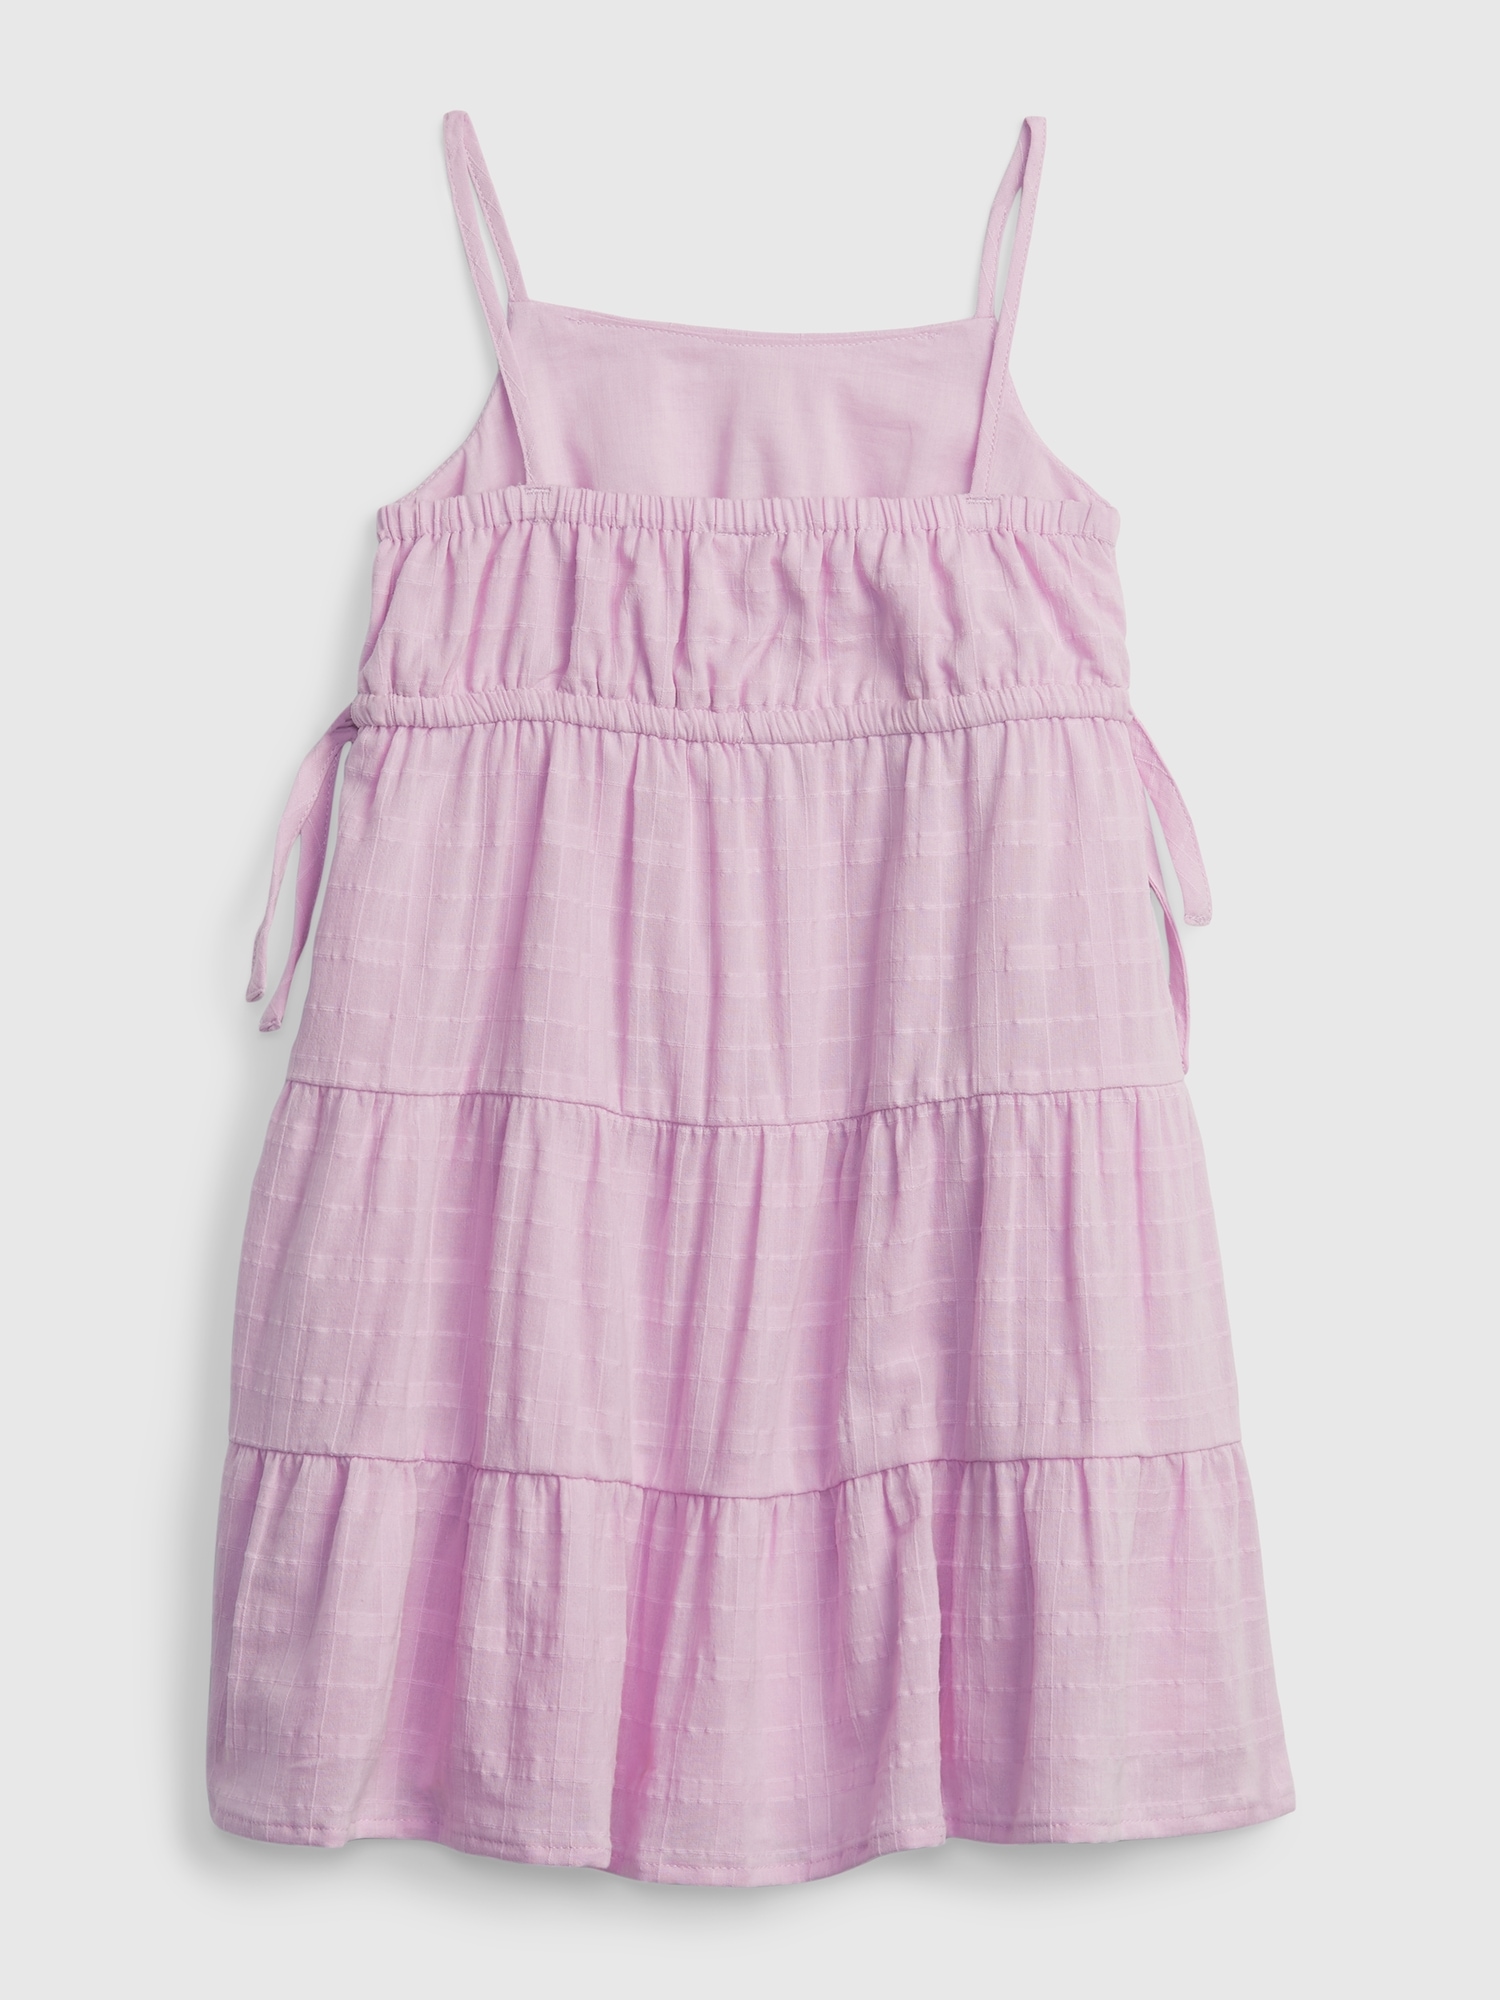 Toddler Tiered Strappy Dress | Gap